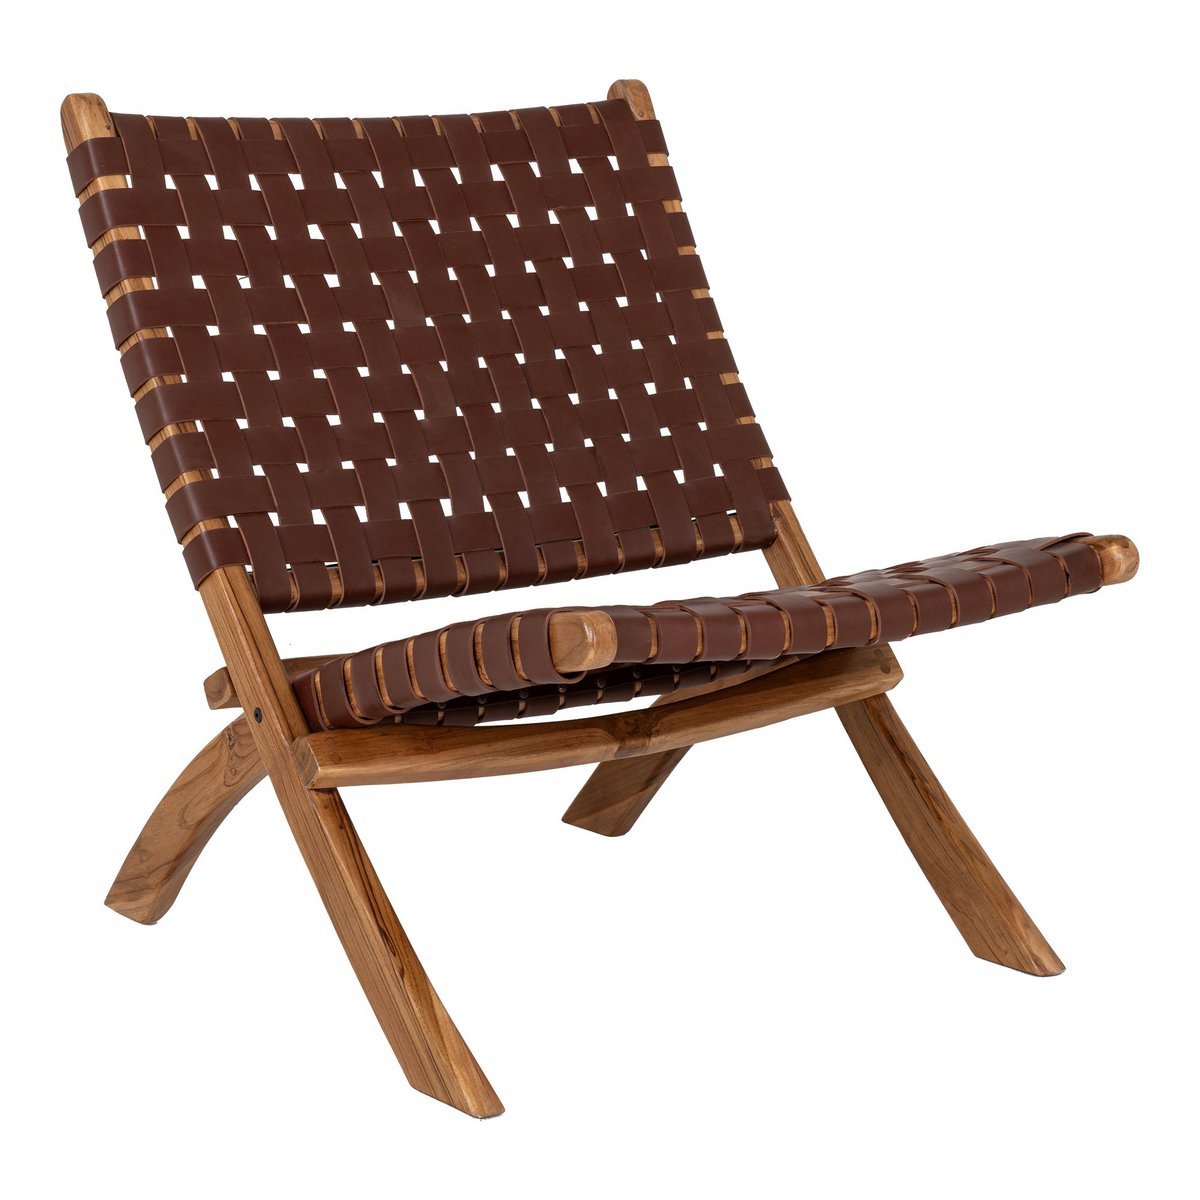 Perugia folding chair leather brown